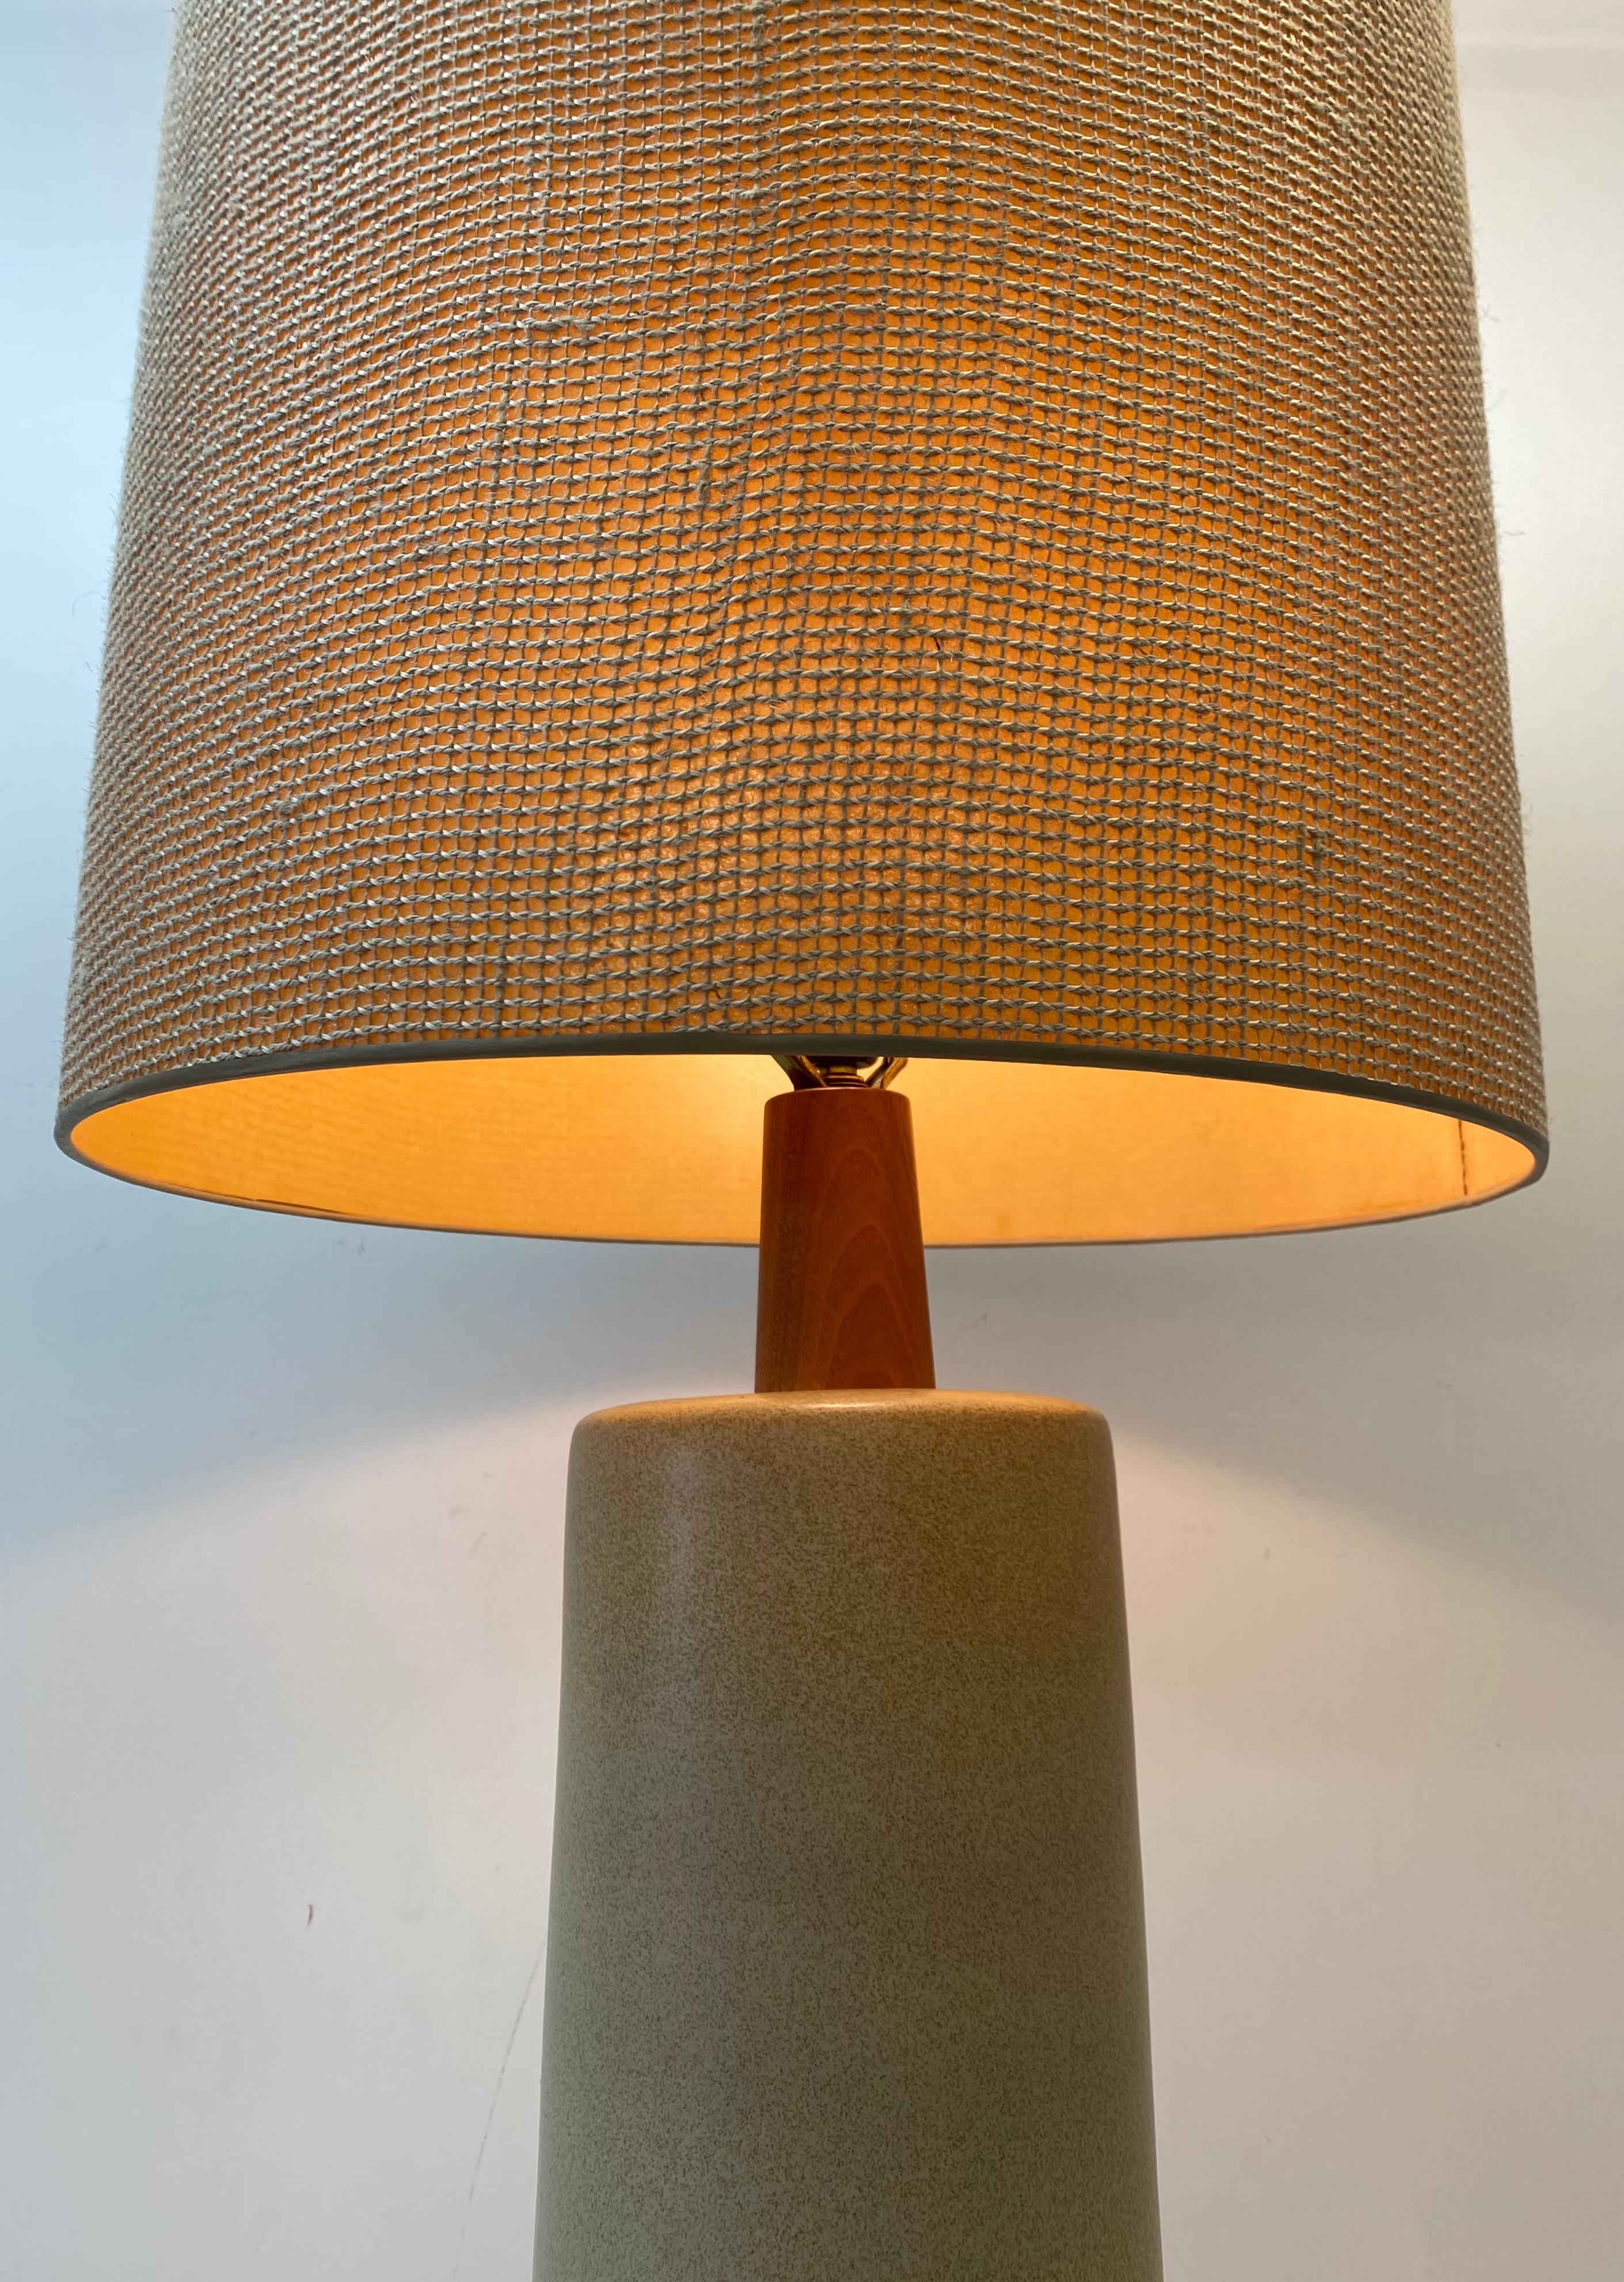 American Martz Malt Glaze Large Scale Table Lamp with Shade, C.1960 For Sale